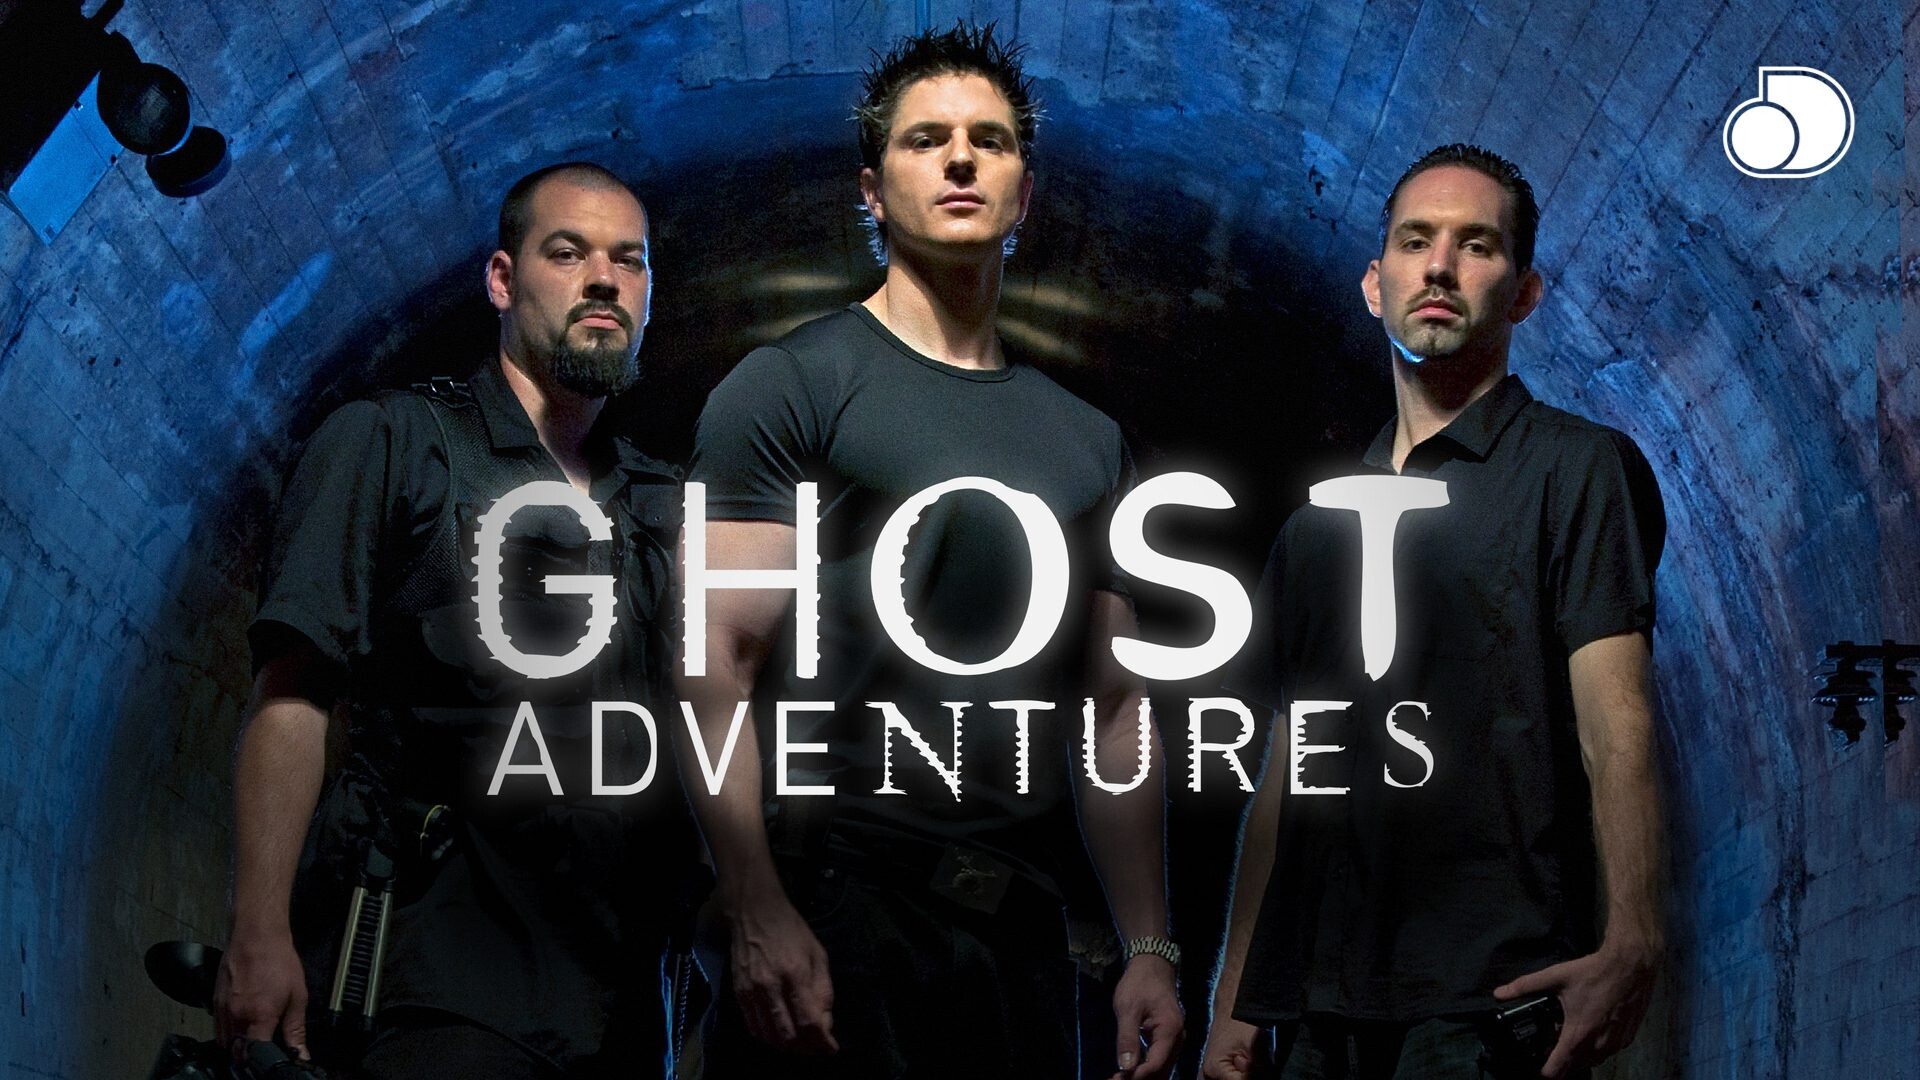 Ghost Adventures (TV Series): Season 3, The crew investigates the most haunted places in the world, Starring Zachary Bagans. 1920x1080 Full HD Background.